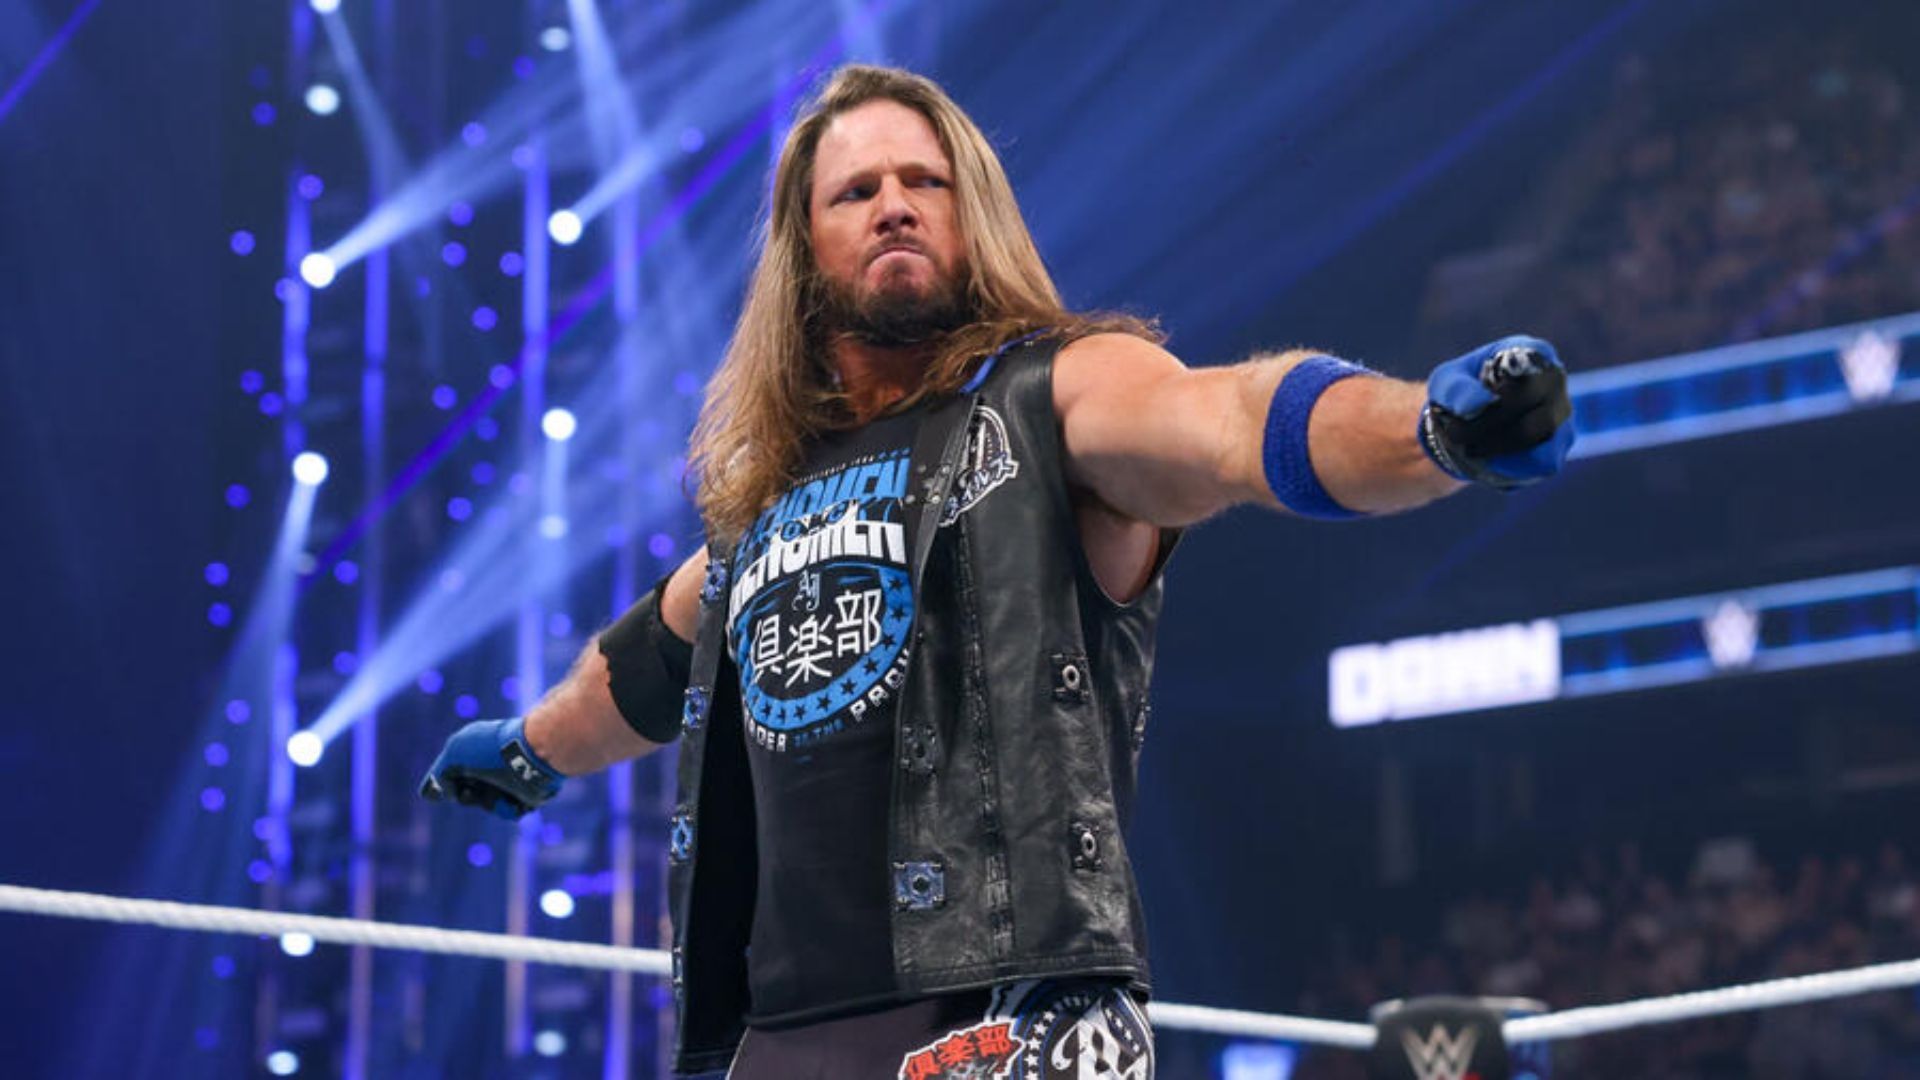 AJ Styles lost to Cody Rhodes at Backlash in France